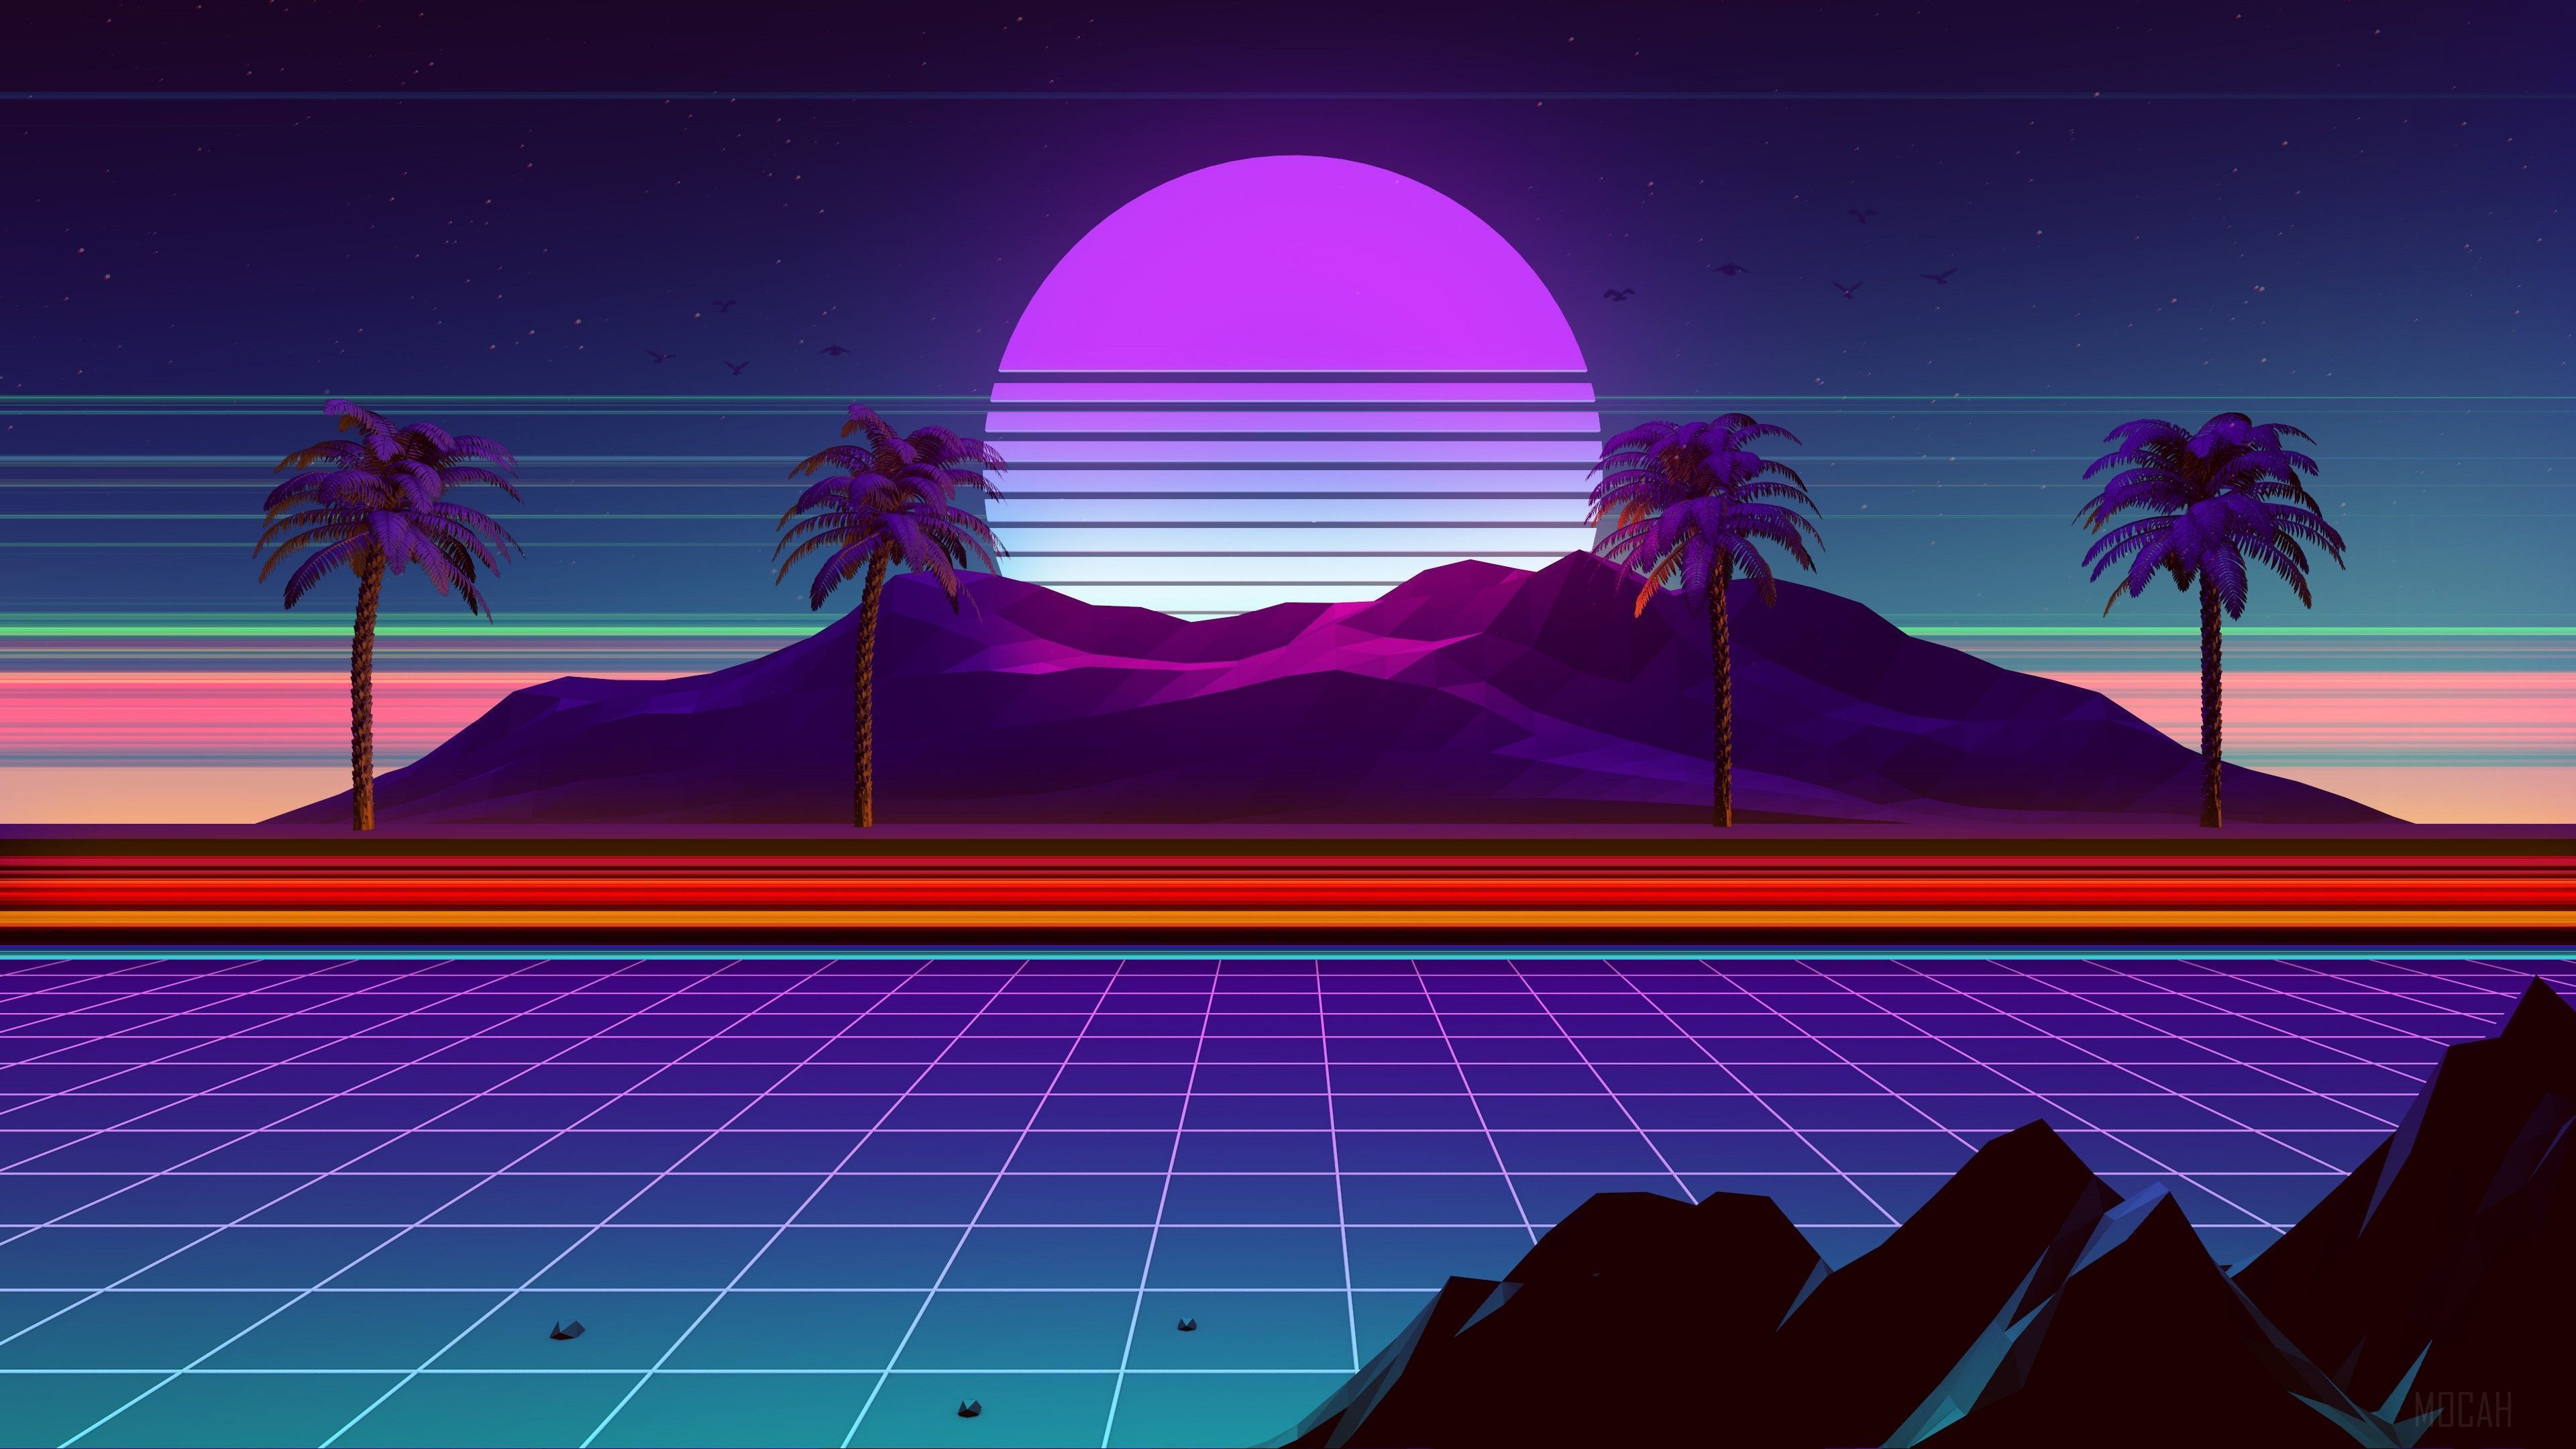 Synthwave 1080P, 2k, 4k HD wallpaper, background free download